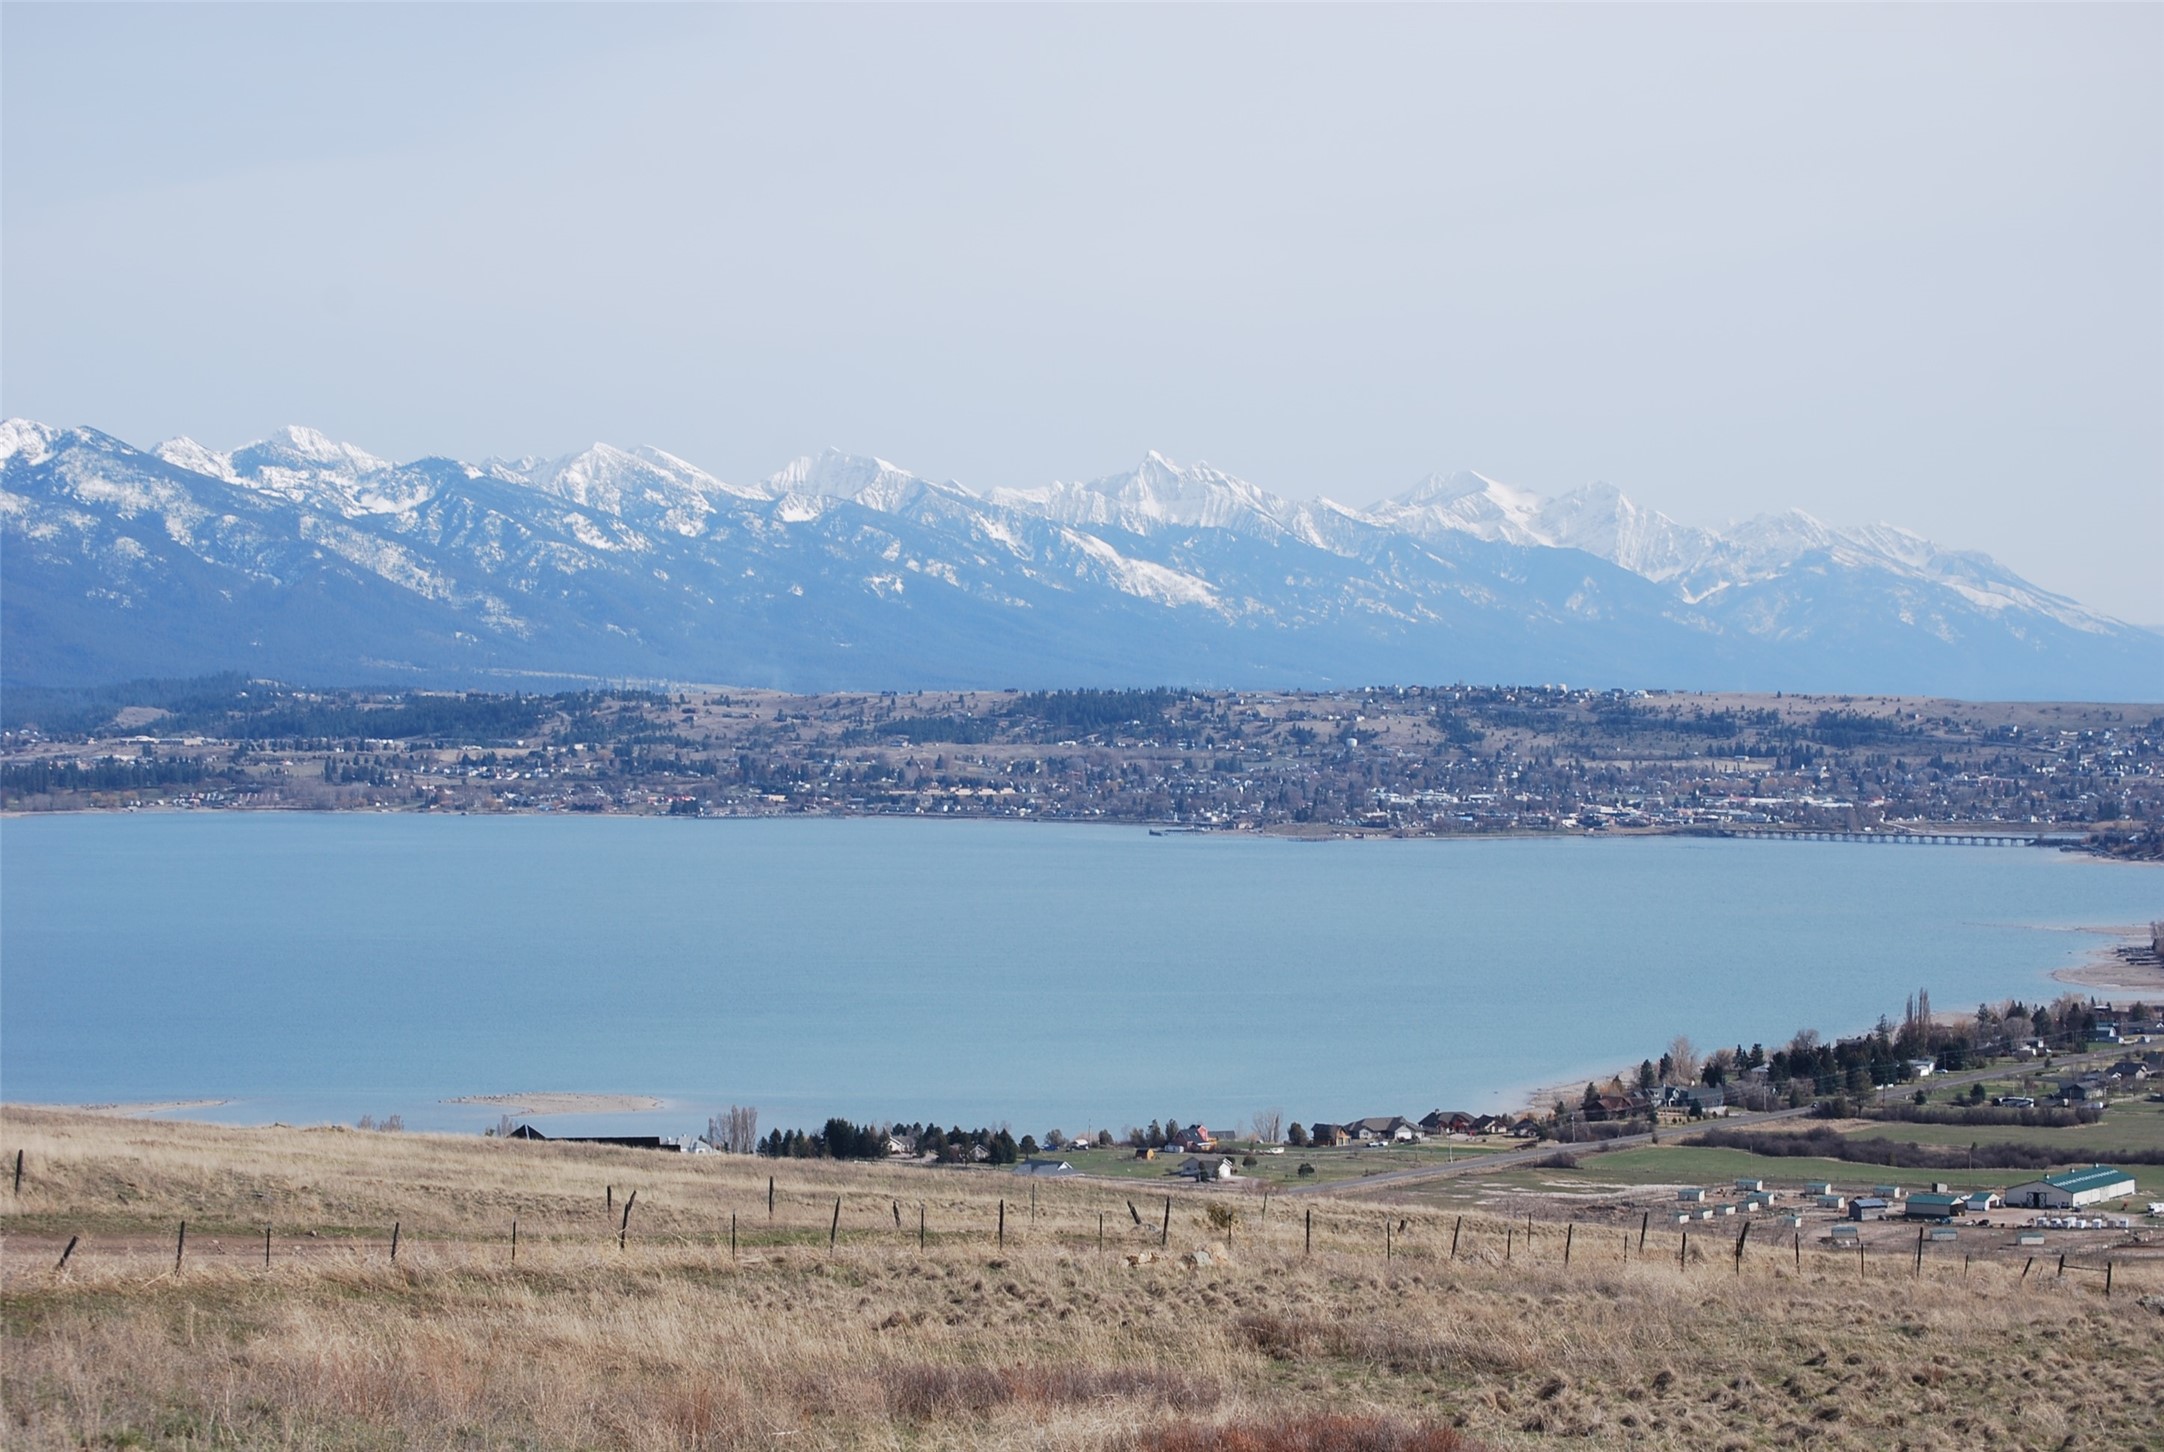 Graze your horses just ten minutes from Polson on this 40 acre tract. Seller financing available. Multiple options for off-grid home-sites on this legacy property.  Access Tribal Conservation lands across the upper boundary.  Gently sloped terrain with unbeatable, expansive  views of  Flathead Lake, the shimmering lights of Polson with the backdrop of the Mission Mountains.  Call Dennis Duty 406-885-3731, Mac Swan 406-253-0855 or your real estate professional.